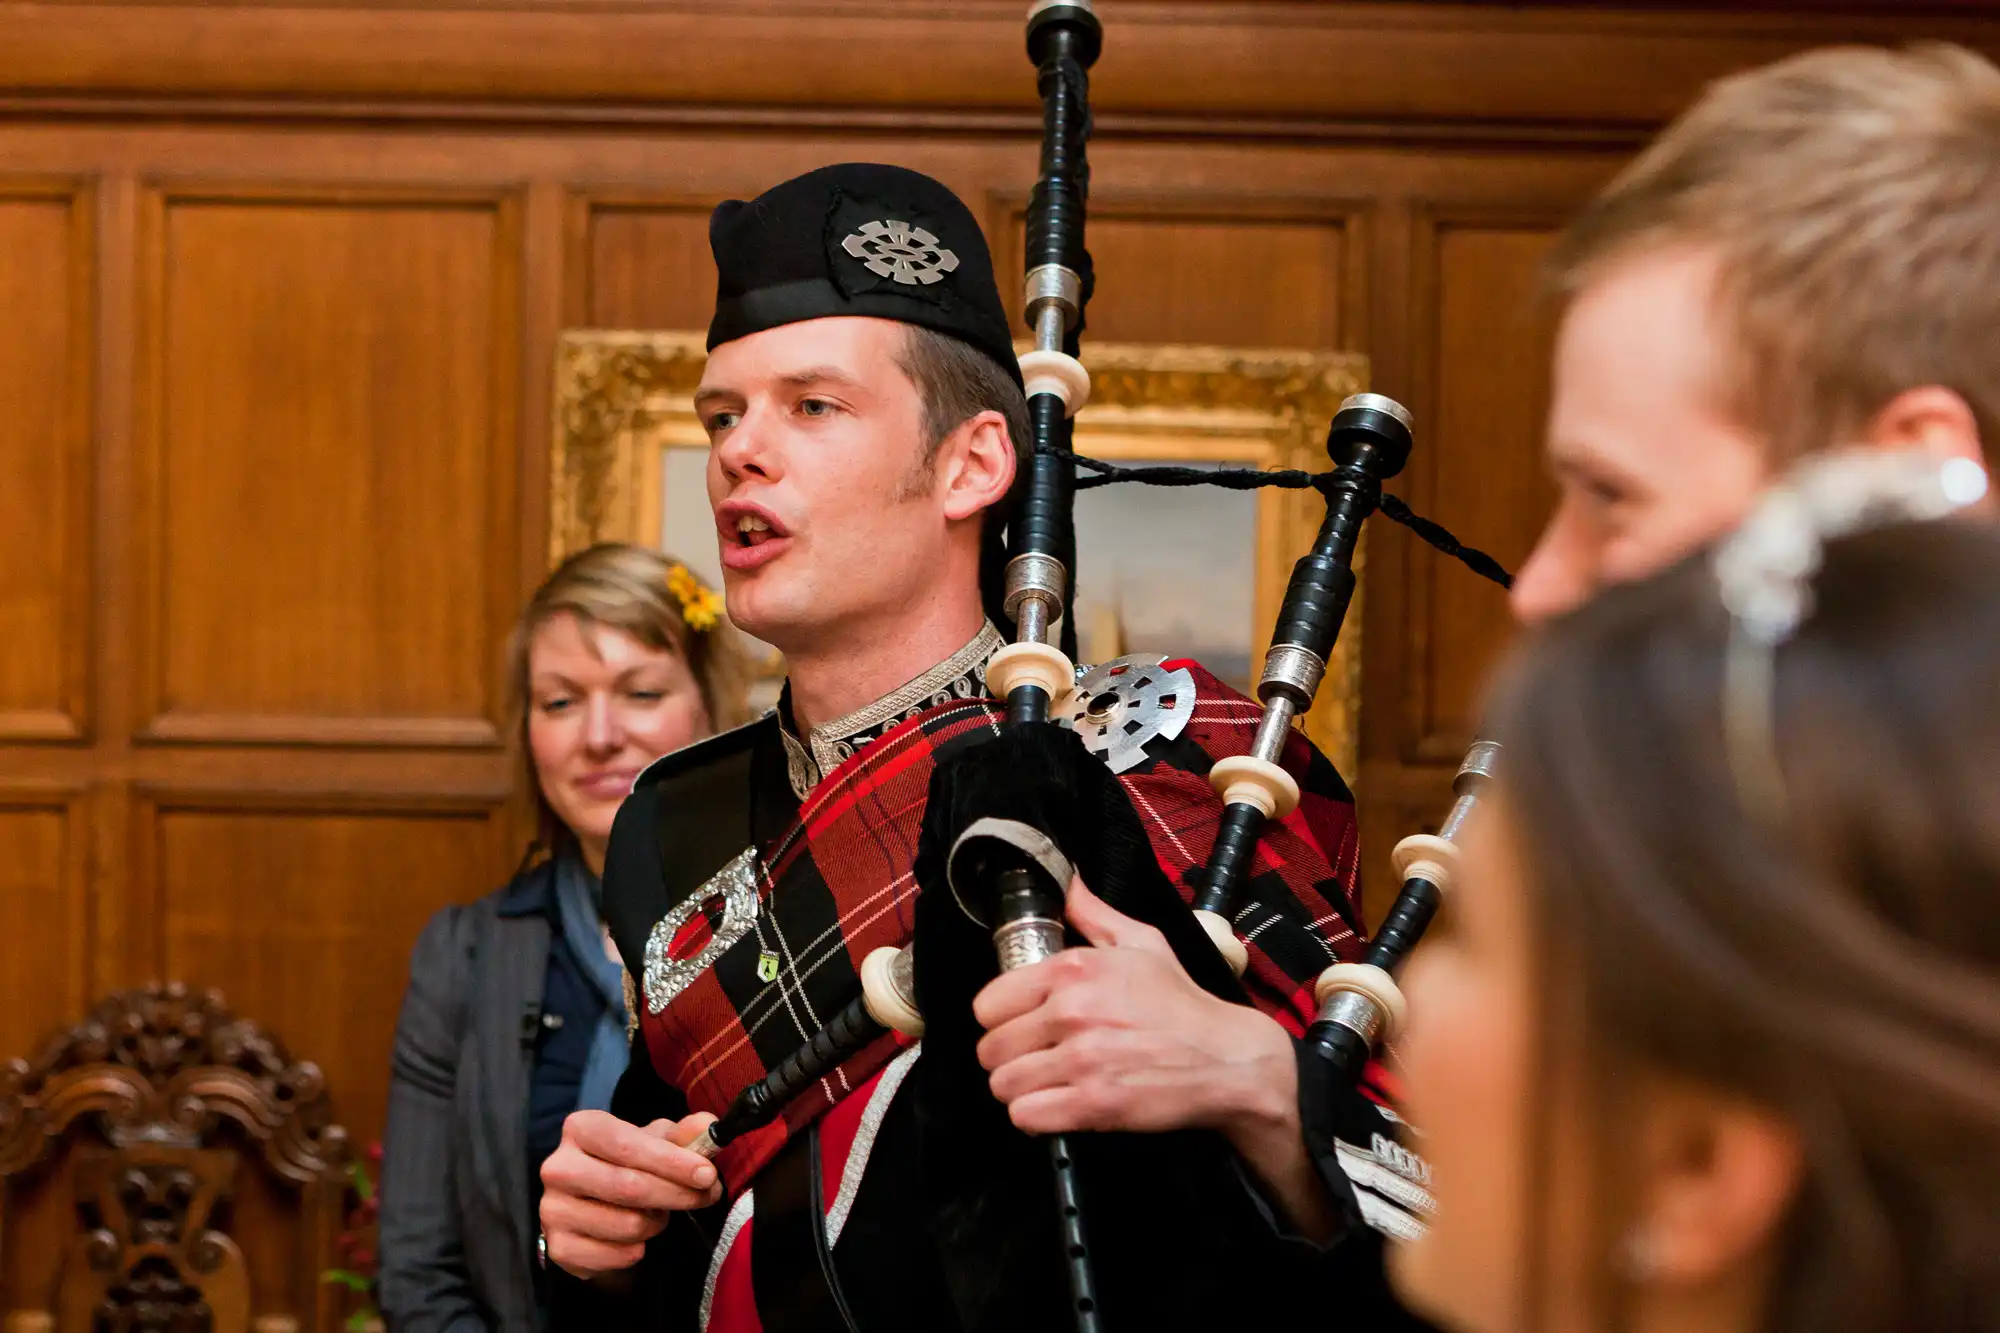 A man in traditional scottish attire playing the bagpipes at an indoor event, with two people observing in the background.